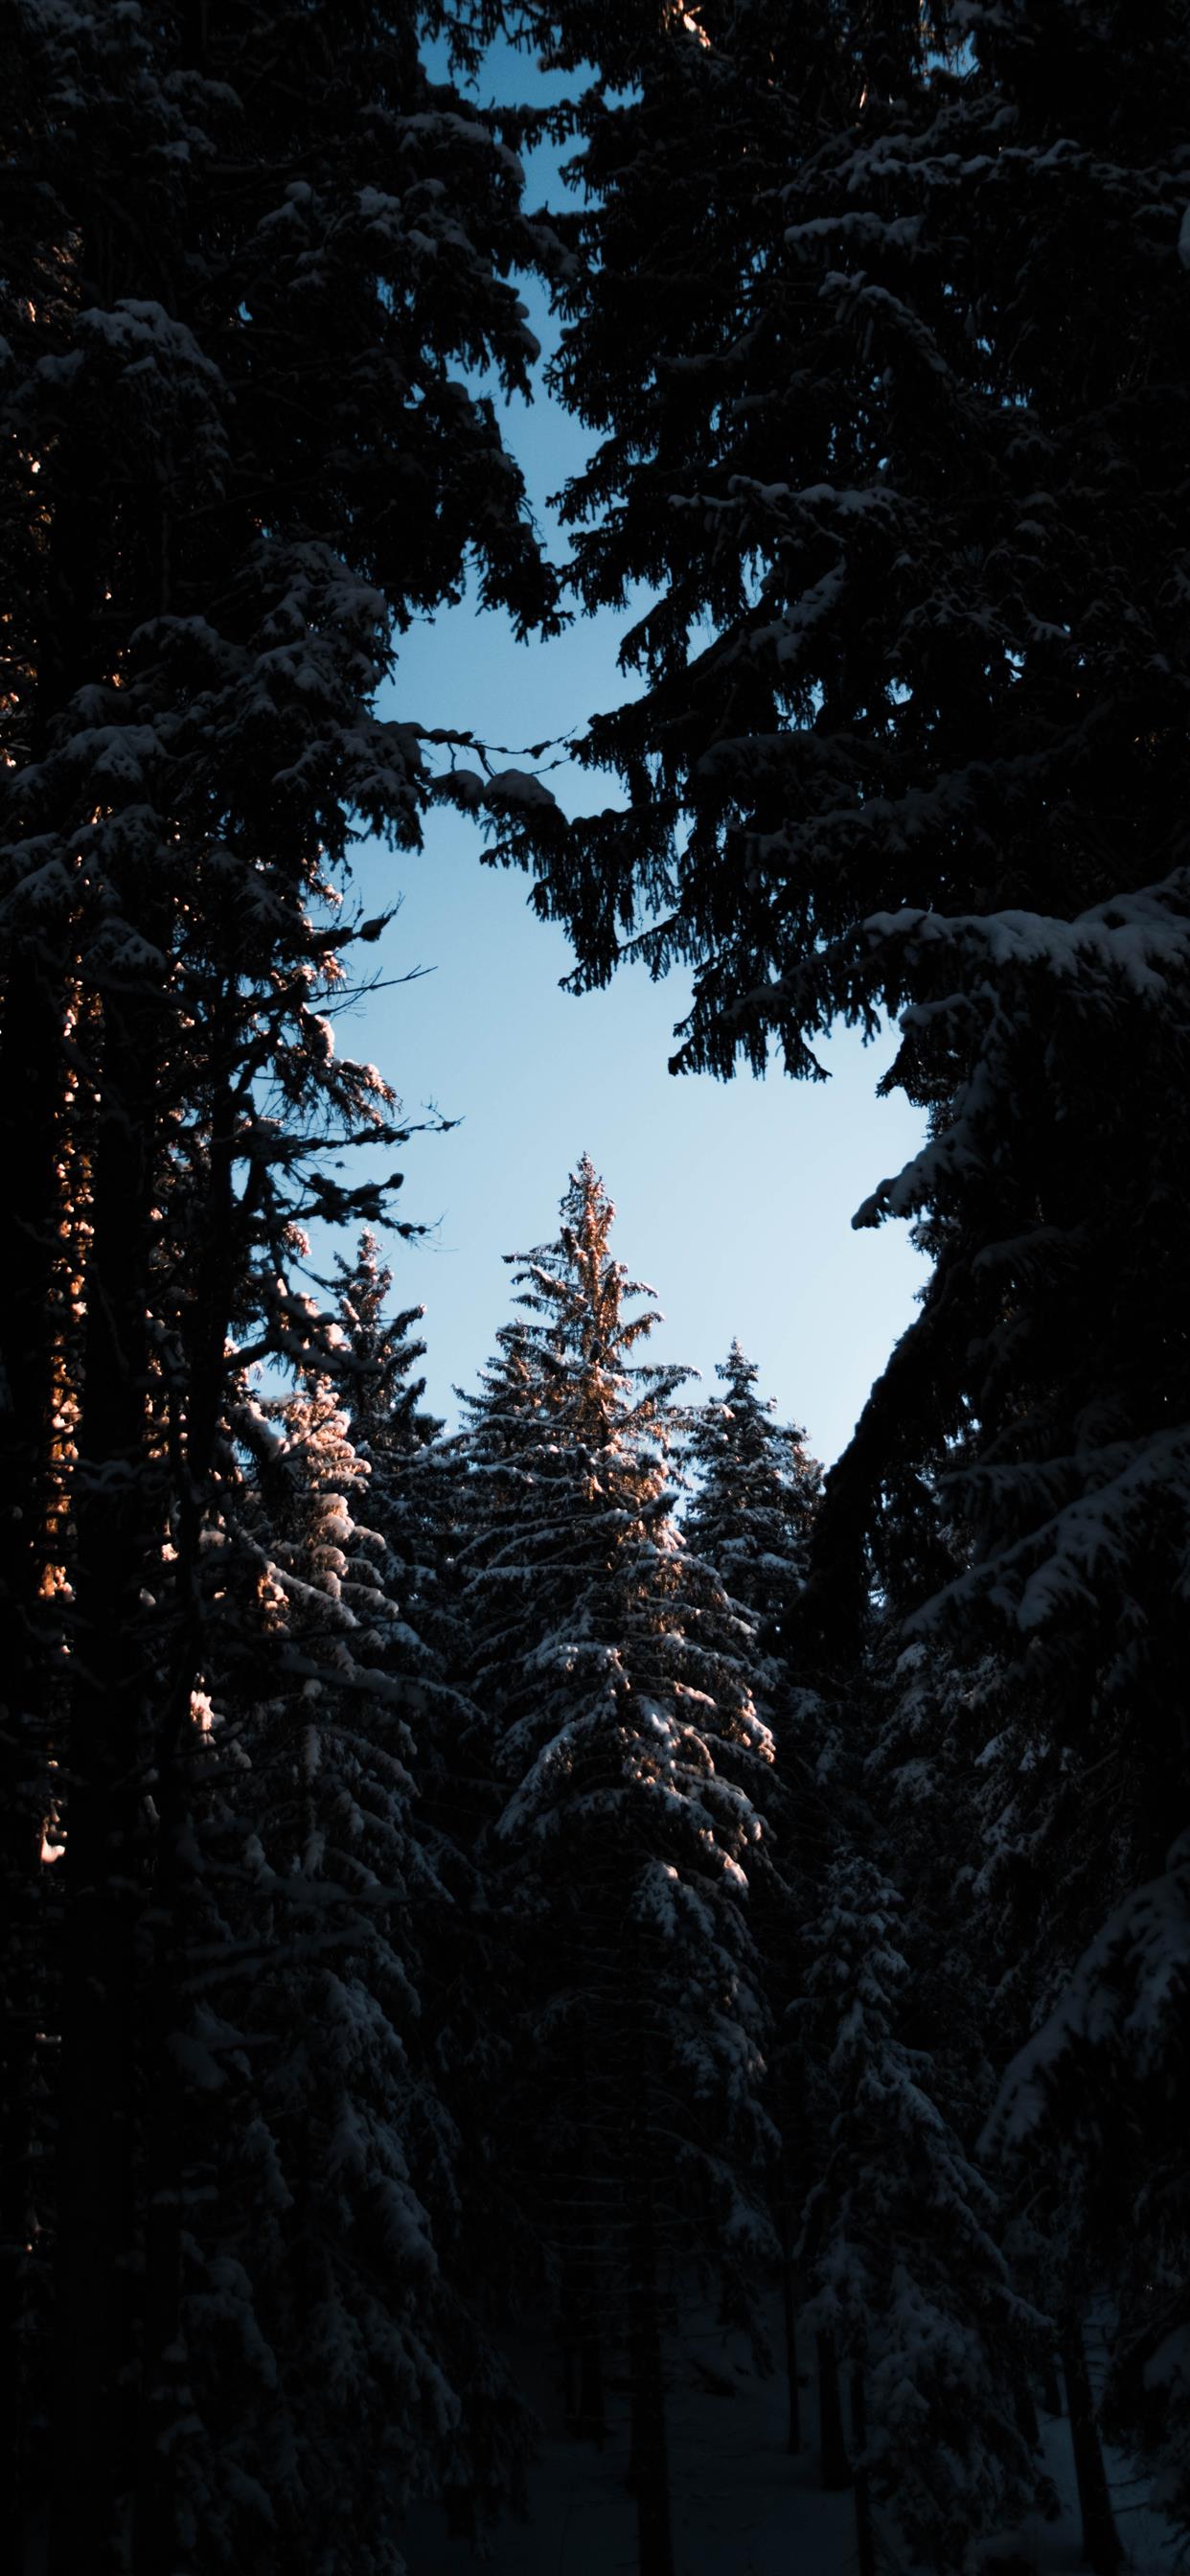 Sunset trough the forest iPhone X Wallpaper Free Download